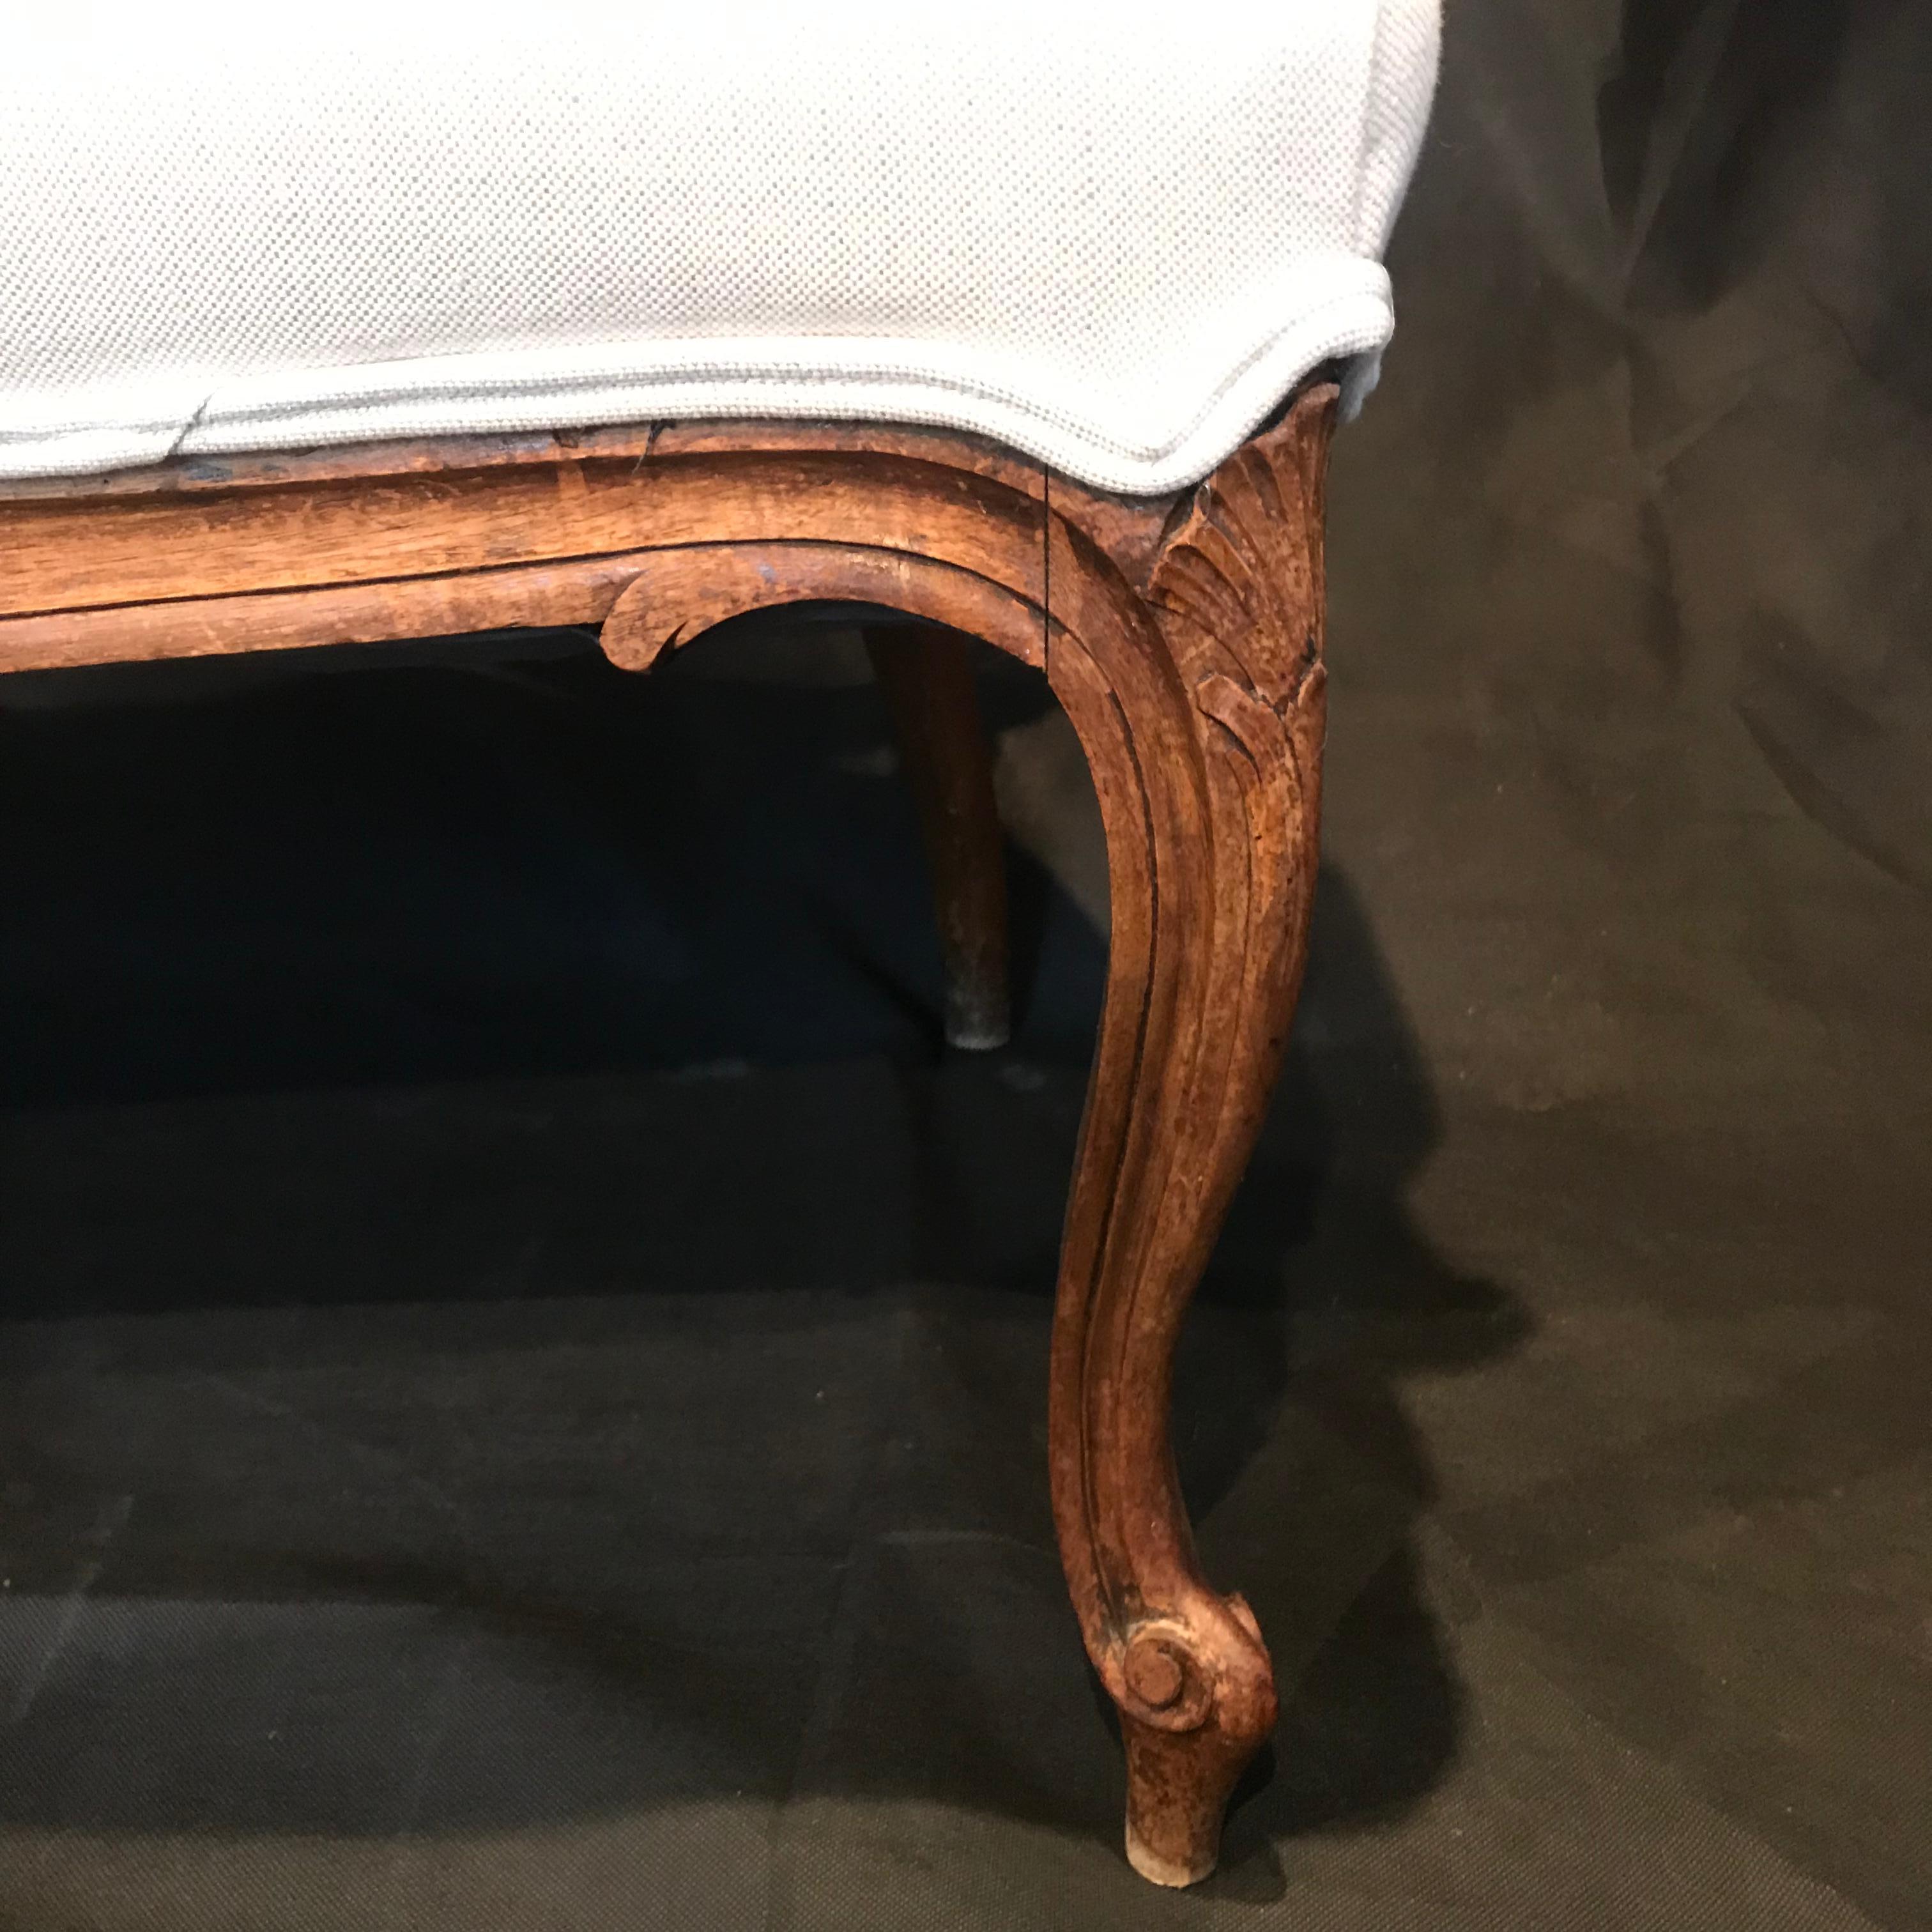 A lovely antique Louis XV style carved walnut sofa having a carved walnut frame finished in its original rich walnut color stain. Frame is ornately adorned with crests and scrolls.  #3052
Brand new neutral French linen cotton fabric with double